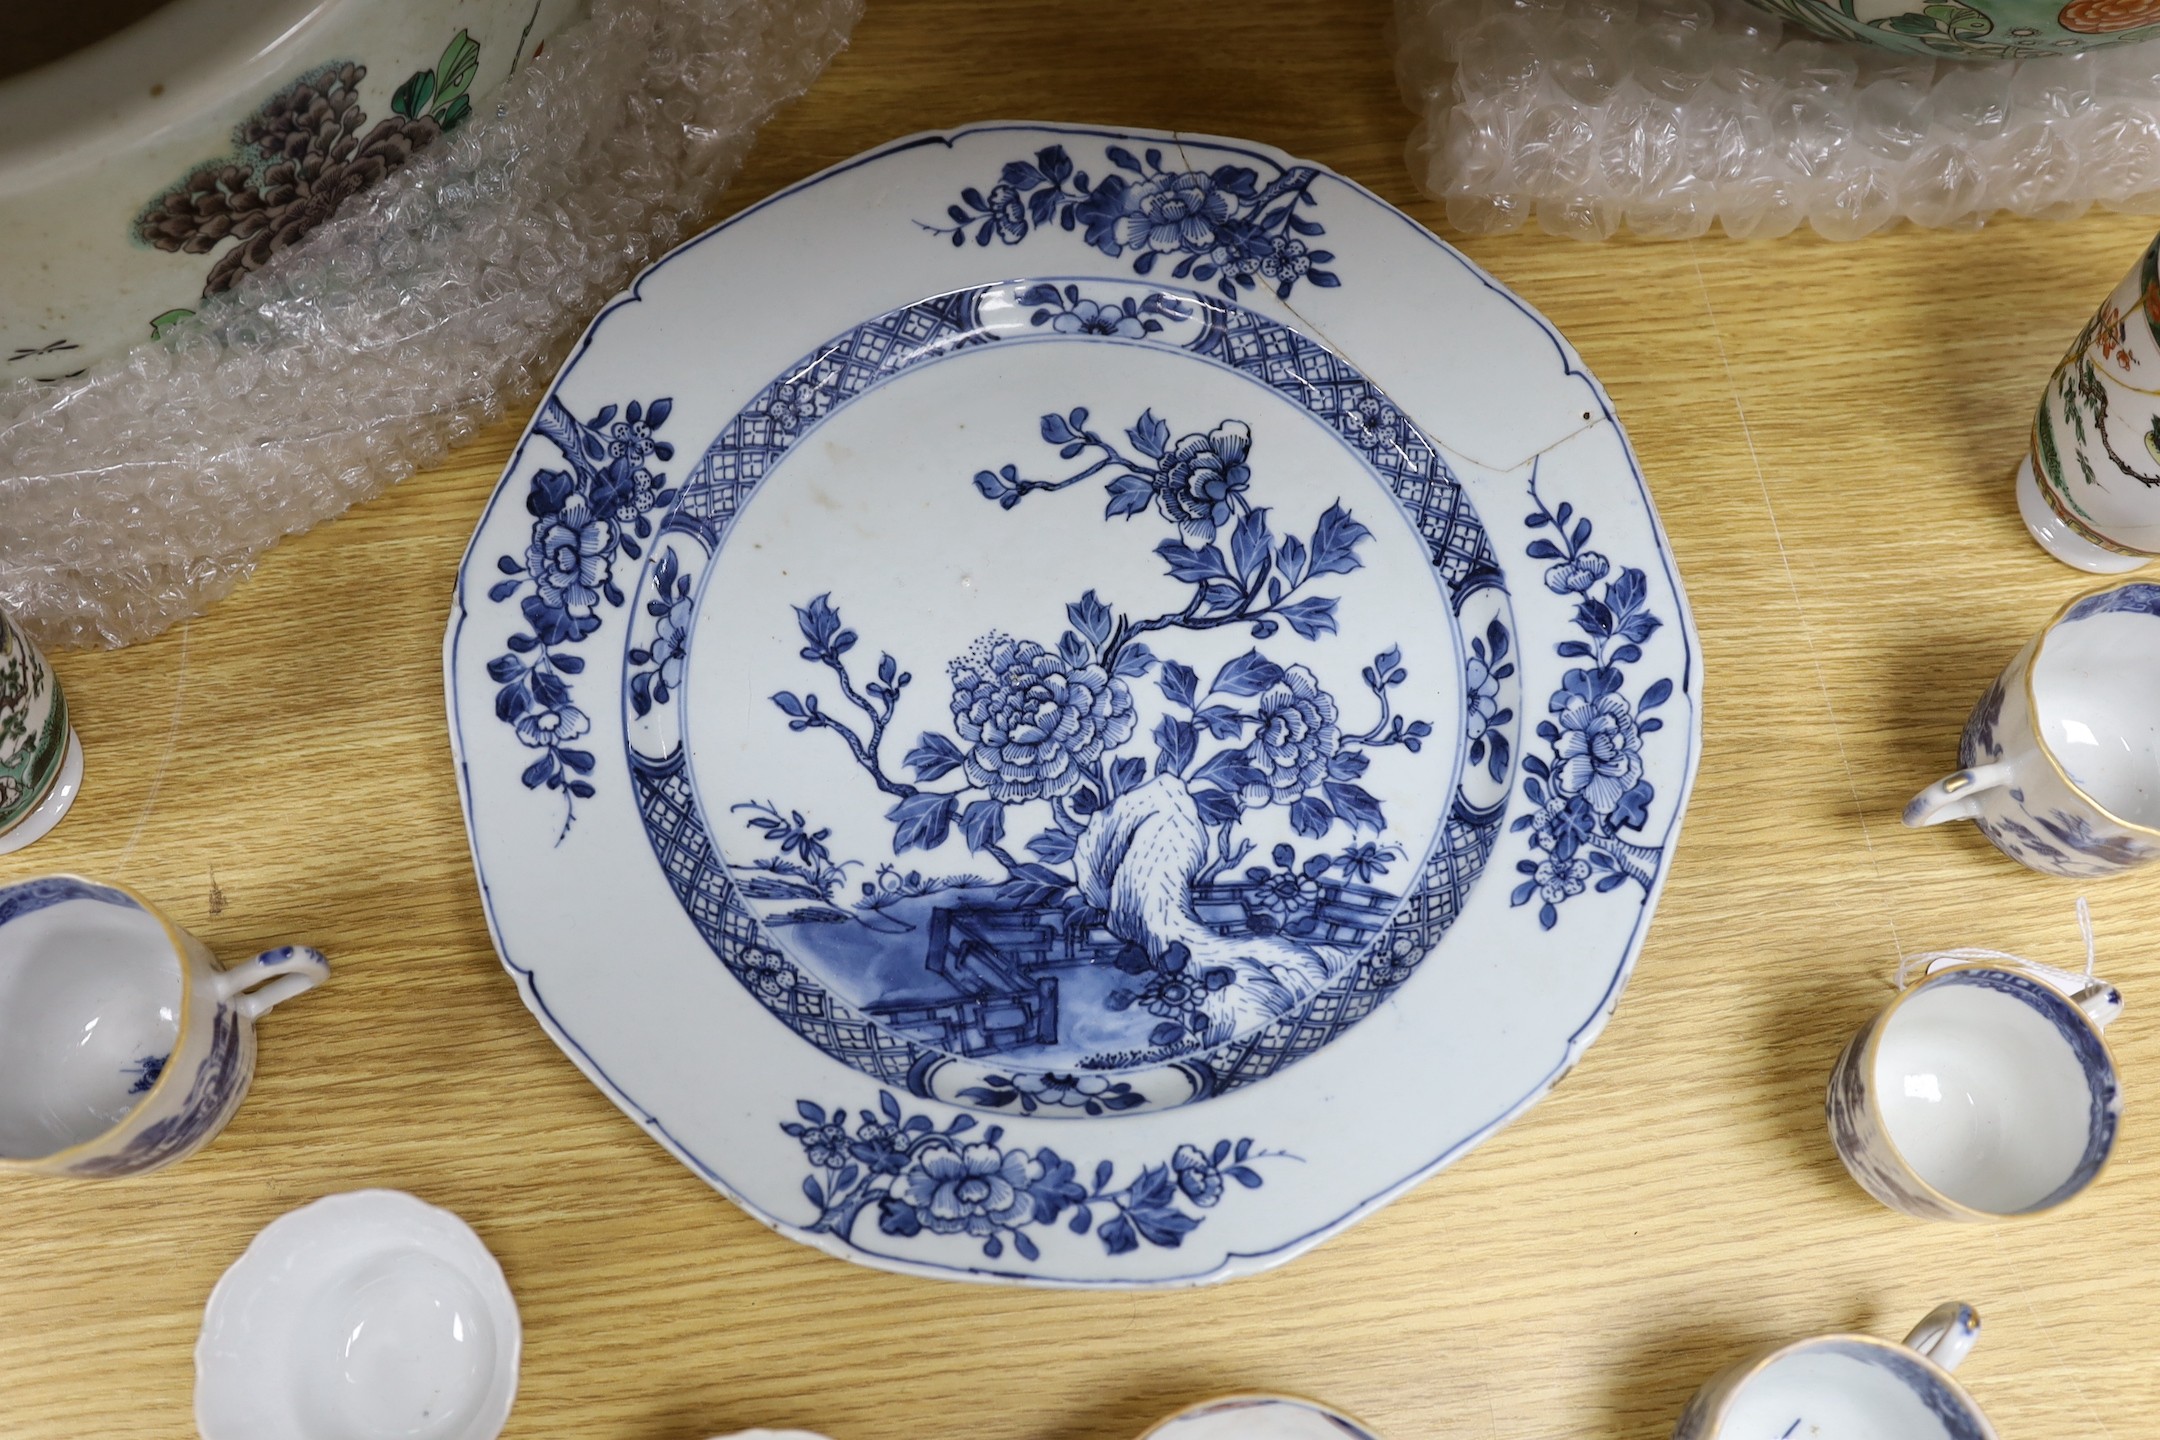 A pair of Chinese Kangxi famille verte cups, together with a large 18th century blue and white plate, and other mixed Chinese porcelain tea wares, including cups, and tea bowls